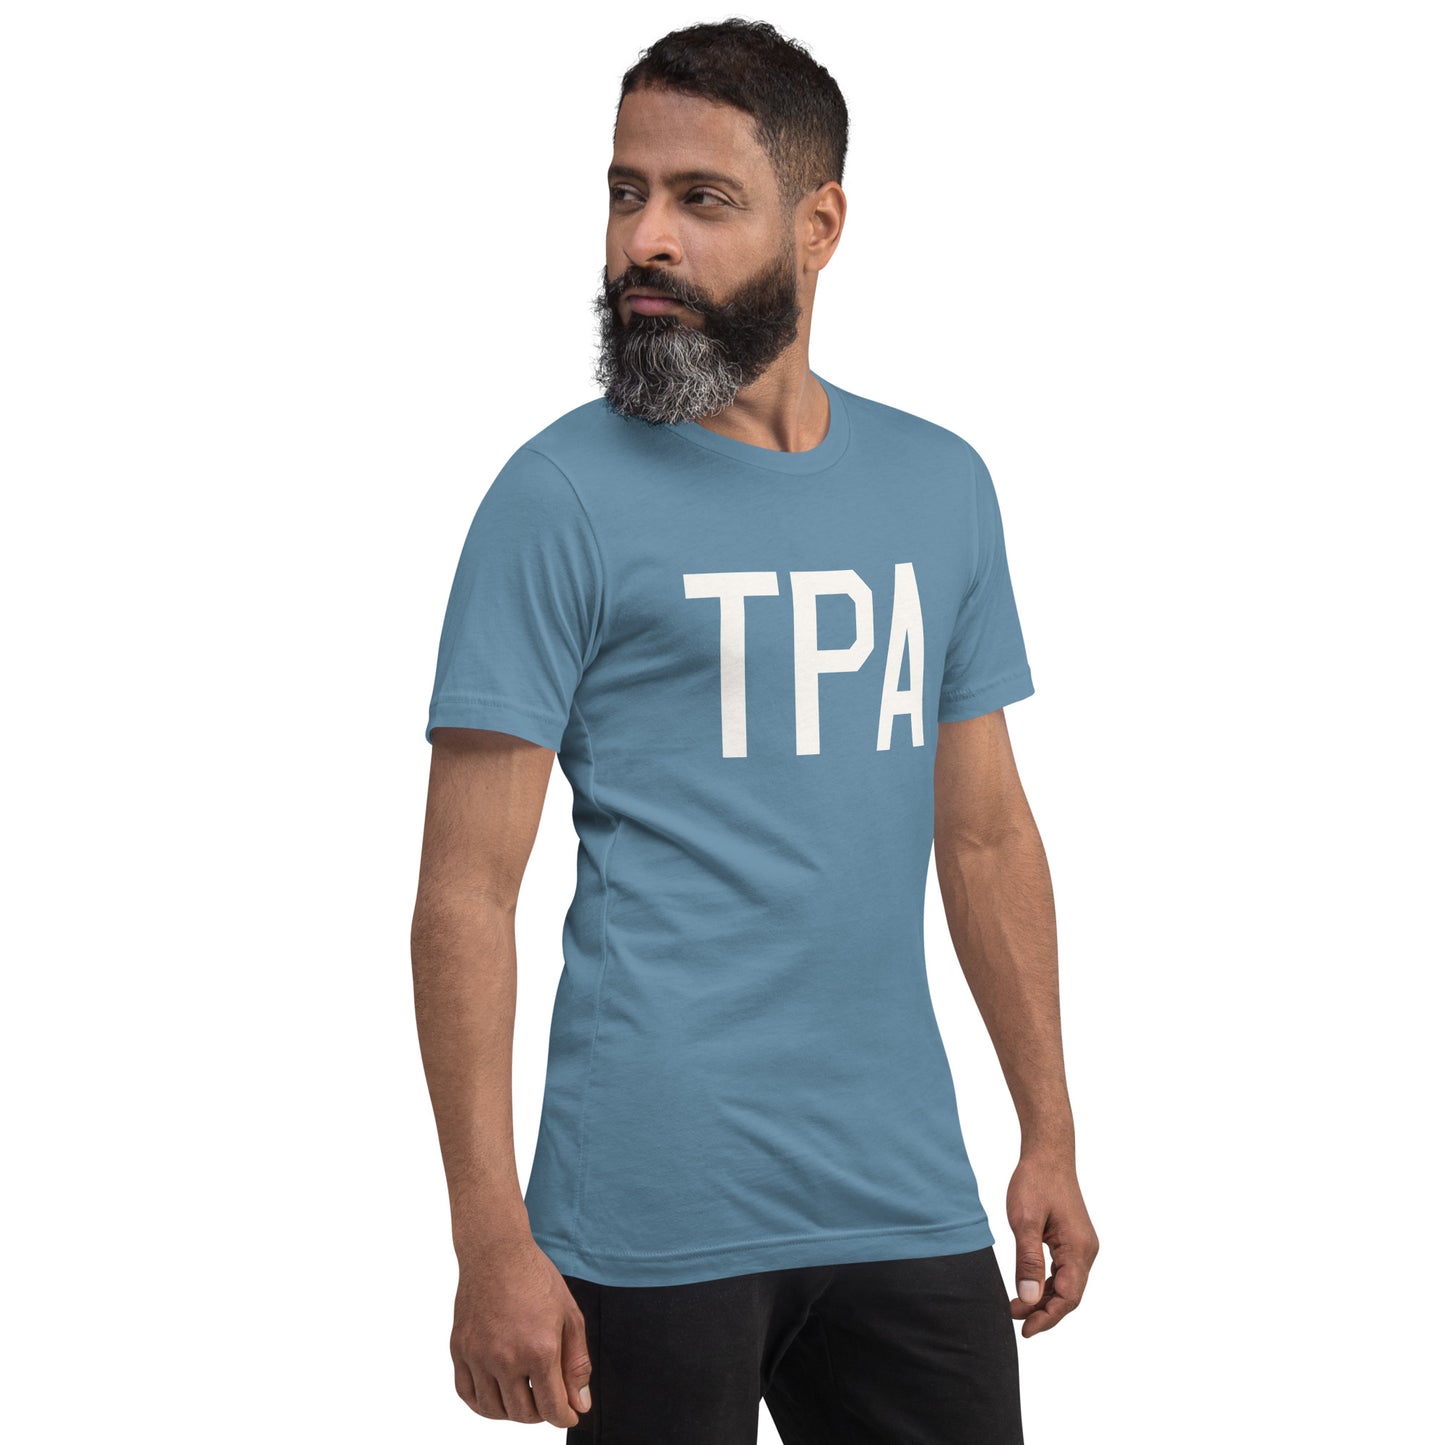 Airport Code T-Shirt - White Graphic • TPA Tampa • YHM Designs - Image 10